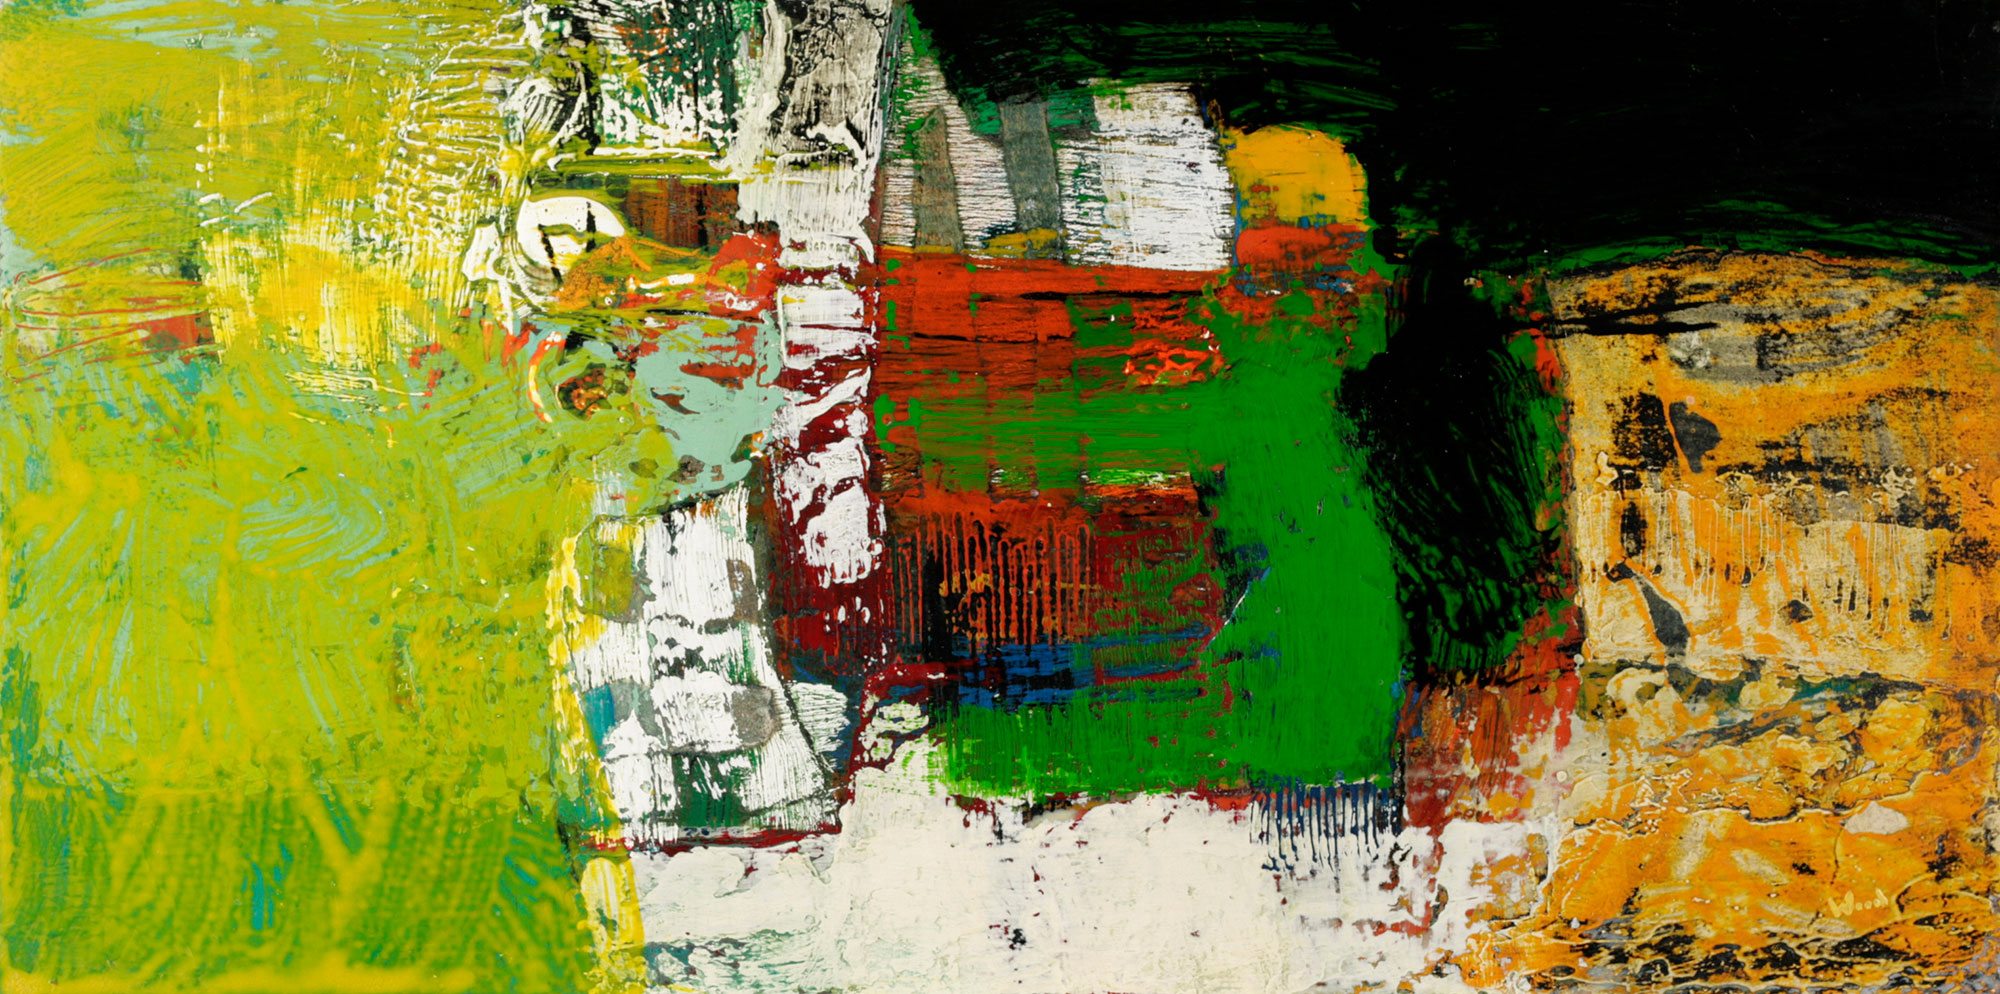 'Three More Days'; 24 x 12 inches (61 x 30.5 cm); Acrylic & Collage on Panel; Cat. 2101 [SOLD]